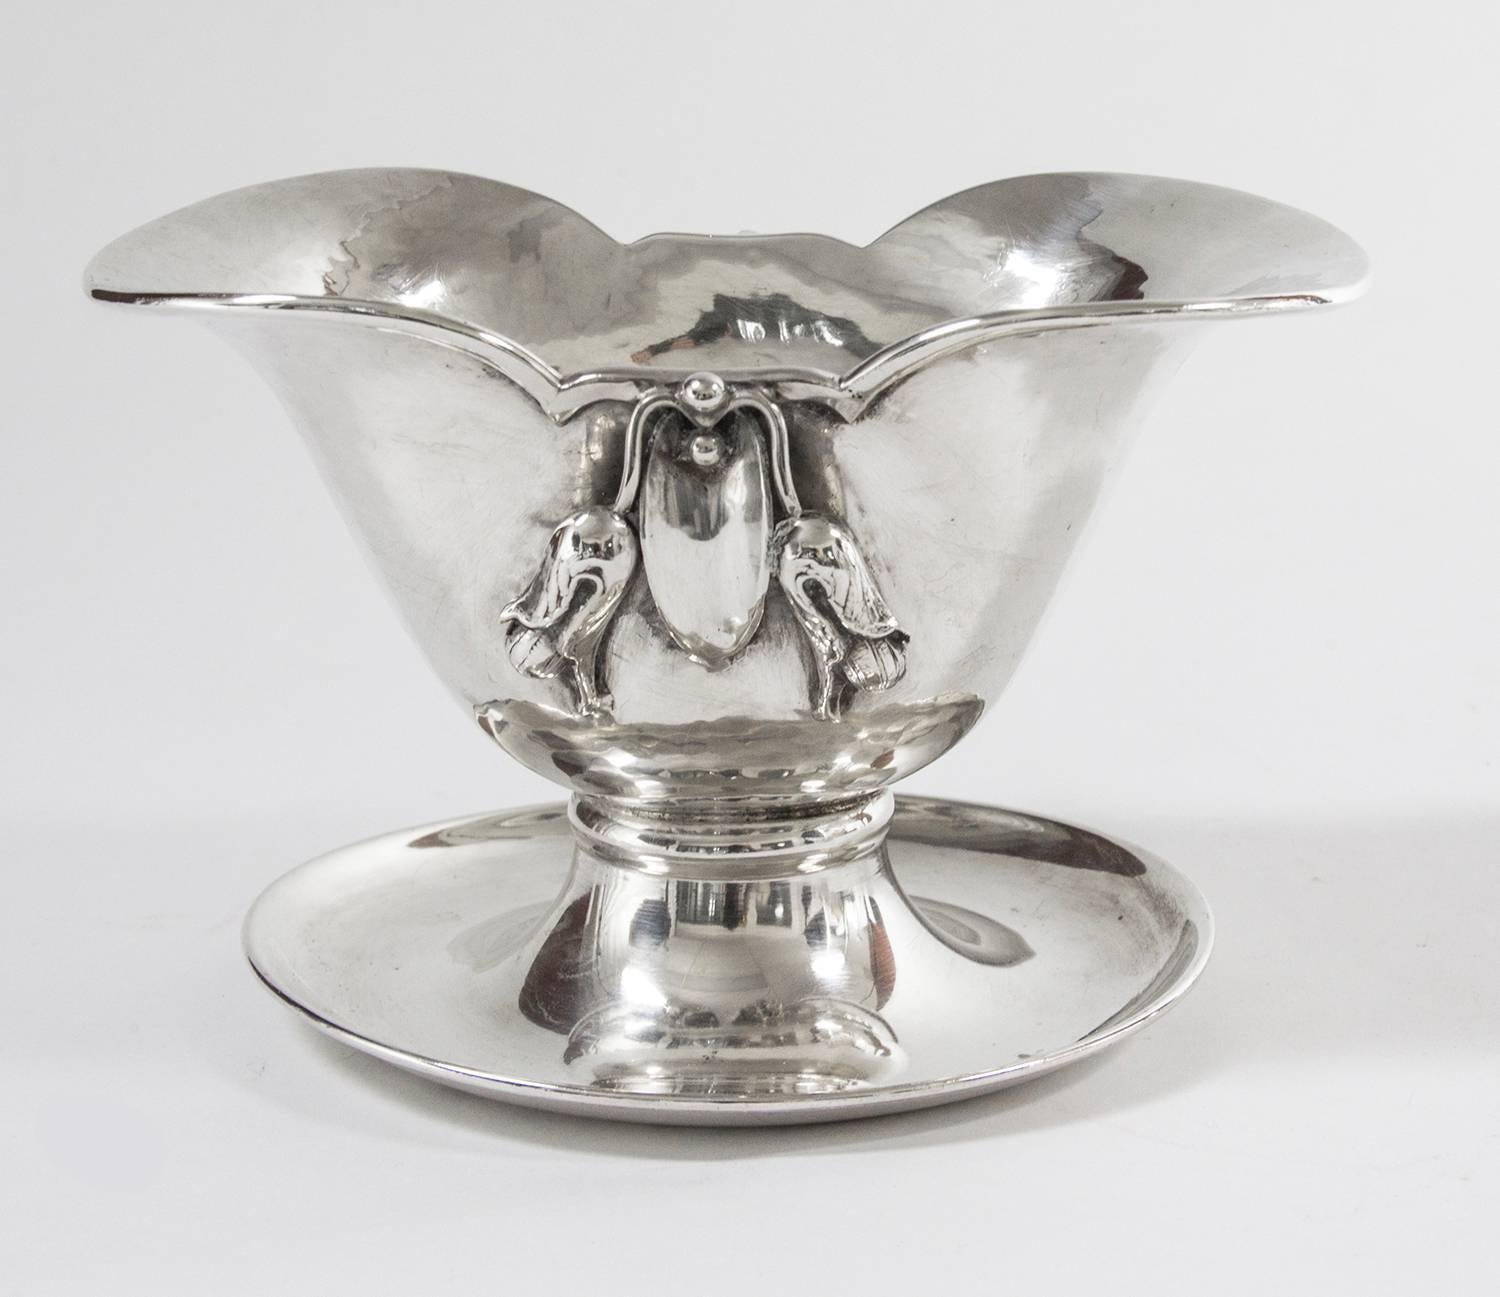 Mid-Century Modern sterling silver gravy boat and matching ladle by renowned Canadian silversmith Carl Poul Petersen, adorned with blossom or pea pod like flowers, hand-hammered, no monograms or engraving, signed 